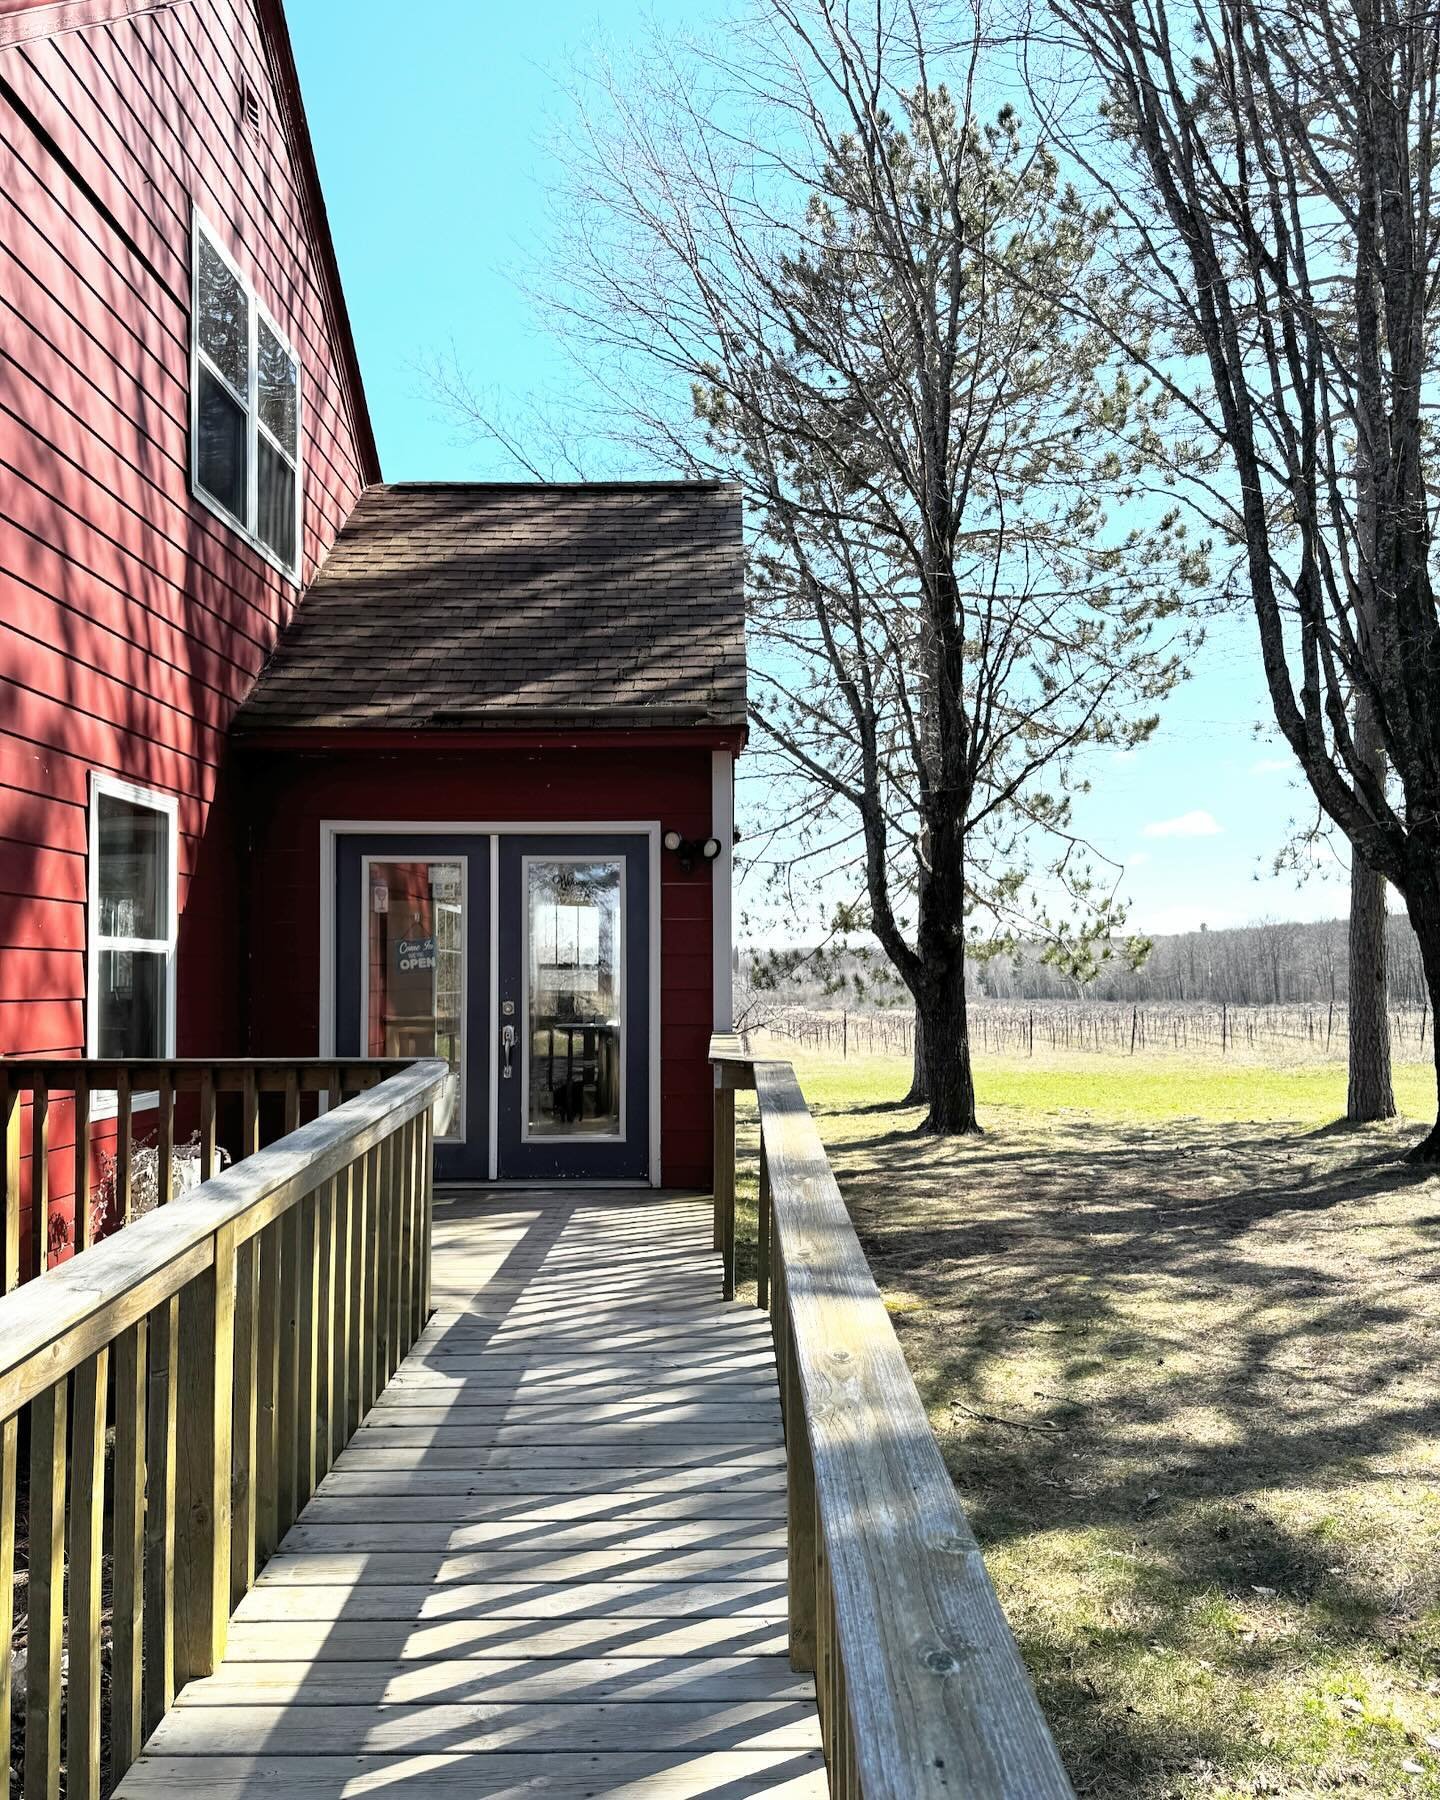 Our favorite local winery opened its doors for the season today! Our guests love adventuring to the @bayfieldwinery and Blue Ox Cider located in the heart of the fruit loop to enjoy the tasting room of locally grown and crafted beverages, a charcuter